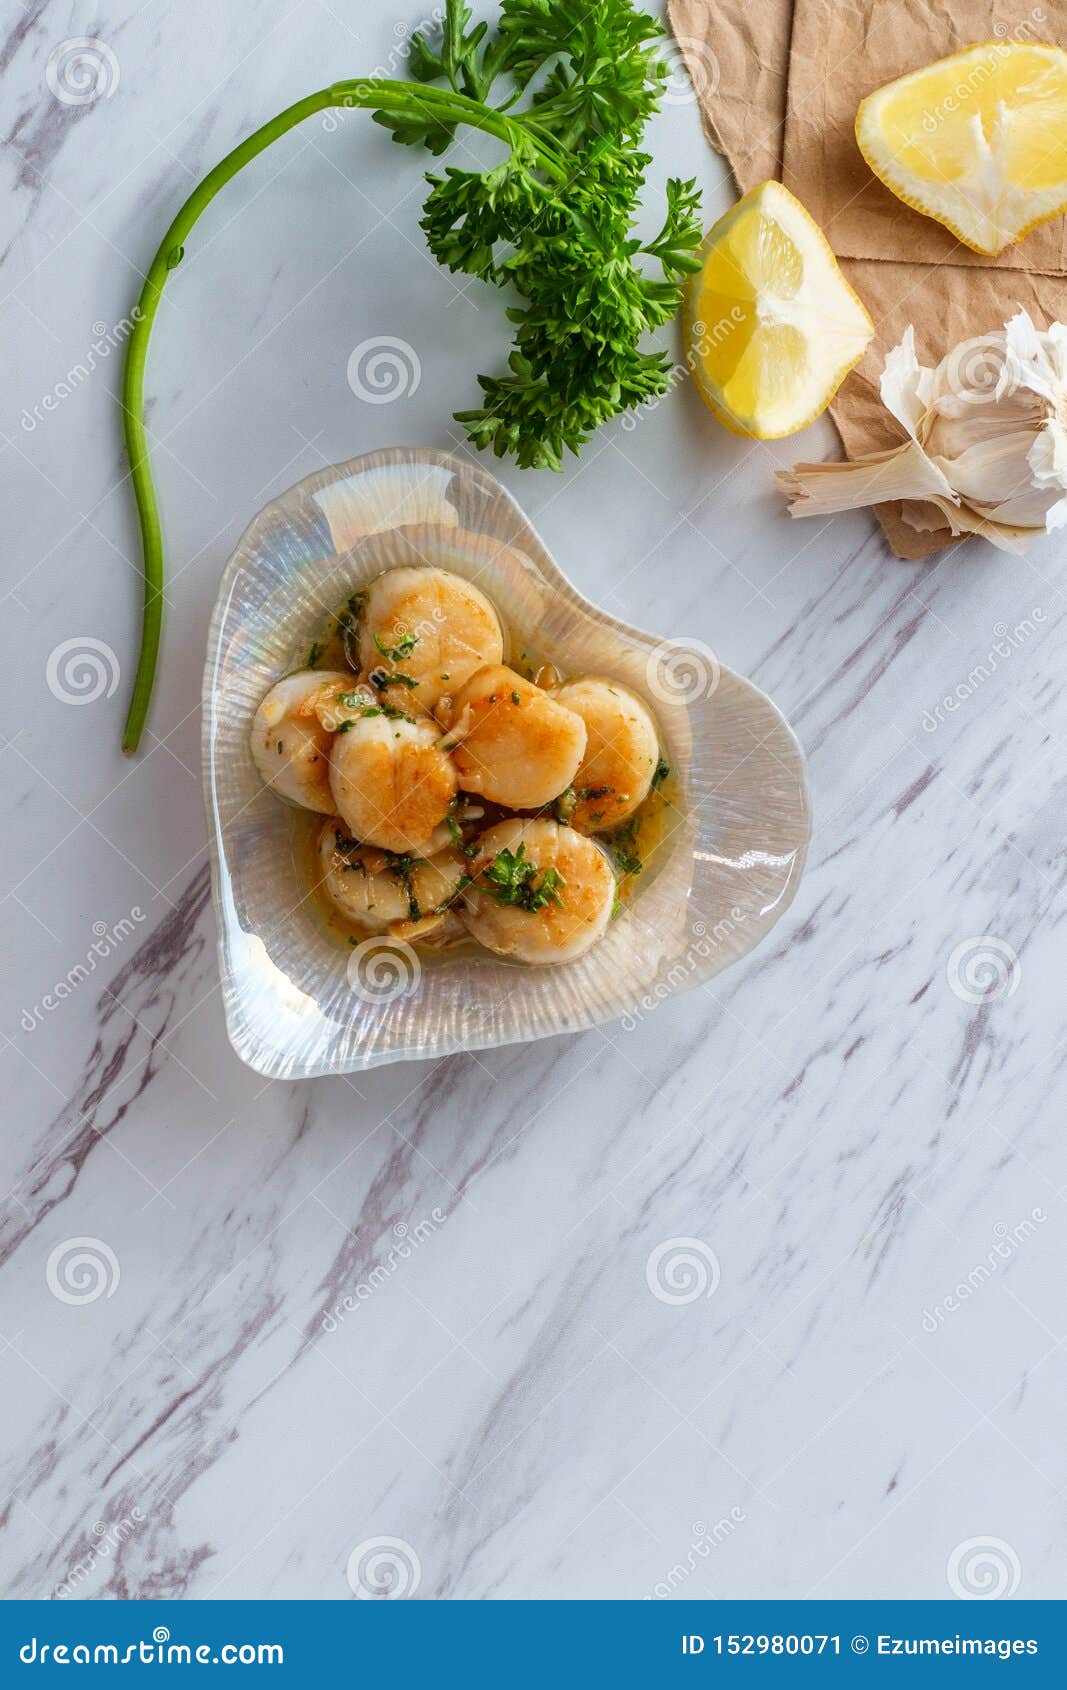 Seared Portuguese Garlic Scallops Stock Image - Image of fried, diet ...